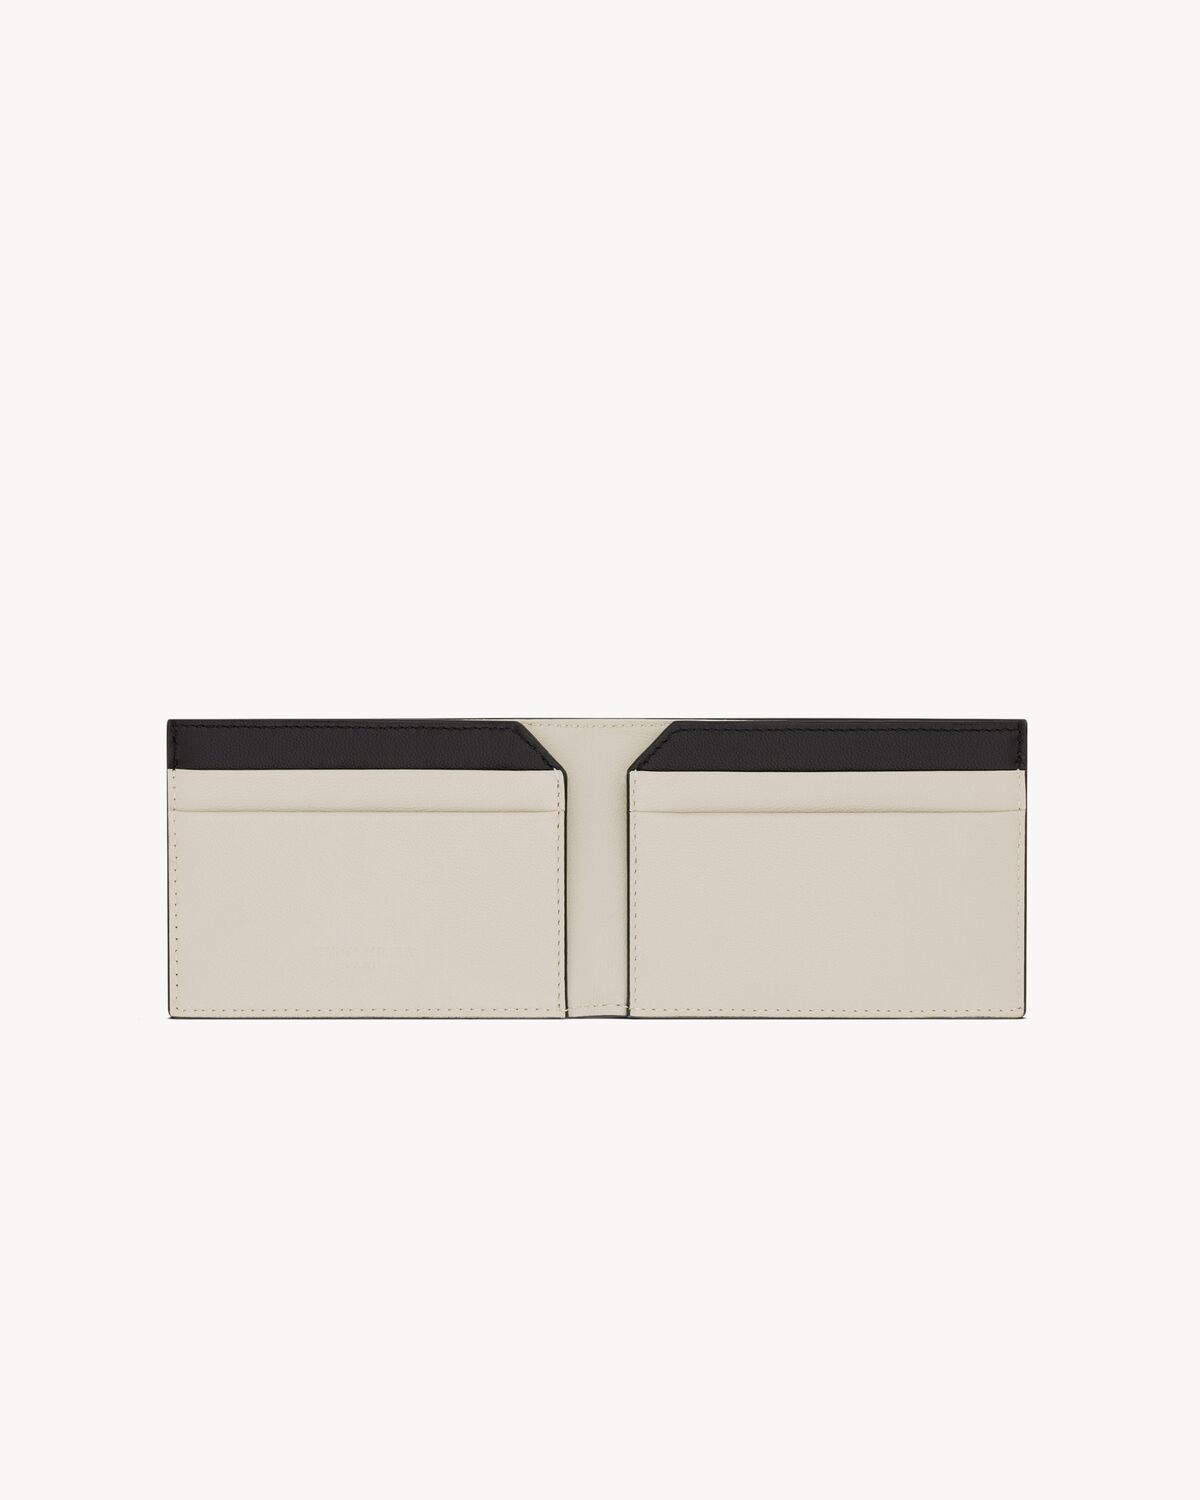 SAINT LAURENT PARIS compact card case in smooth leather